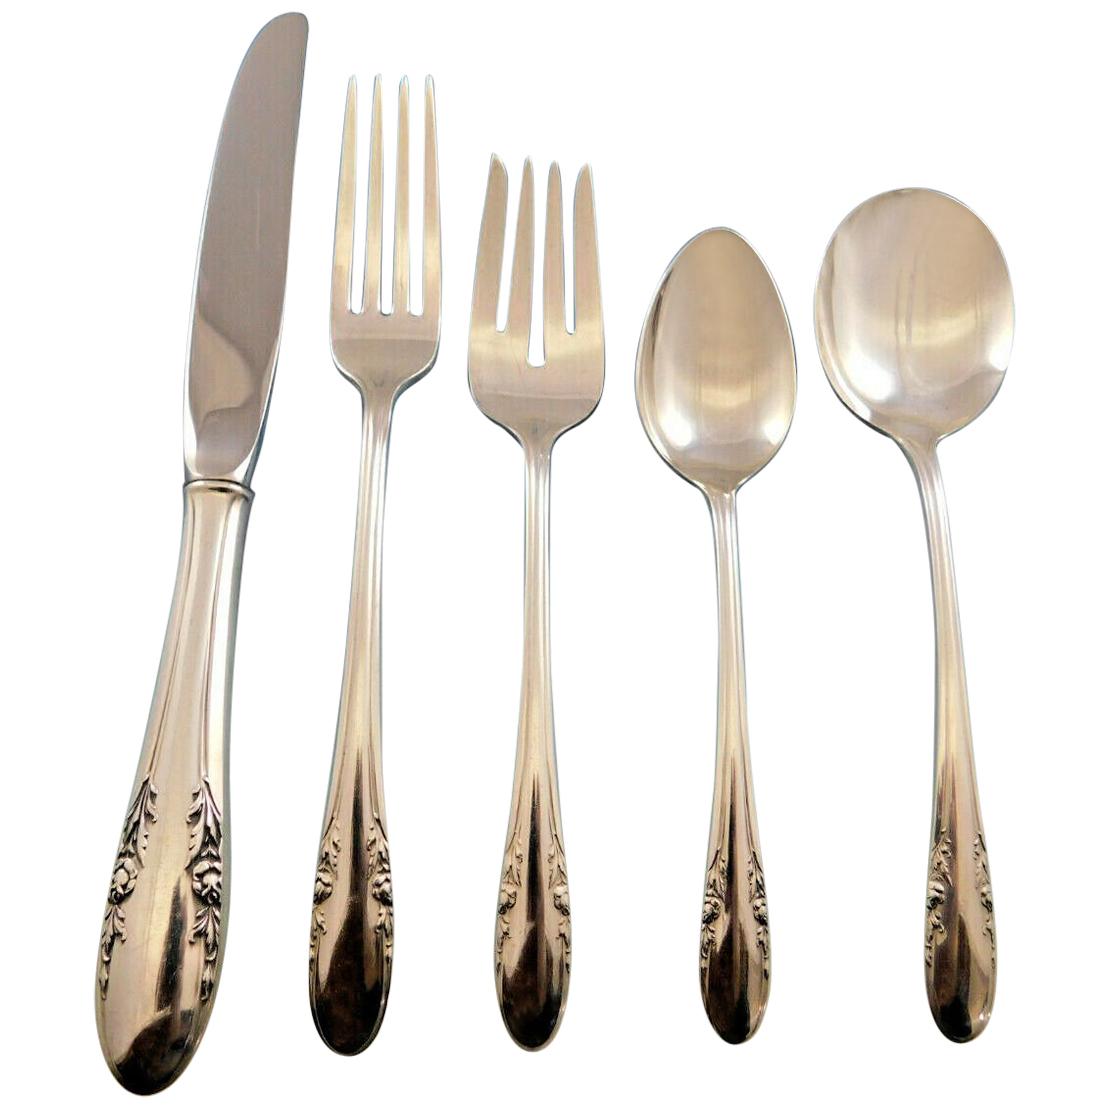 Fashion Lane by Durgin Sterling Silver Flatware Set for 8 Service 54 Pcs Scarce For Sale